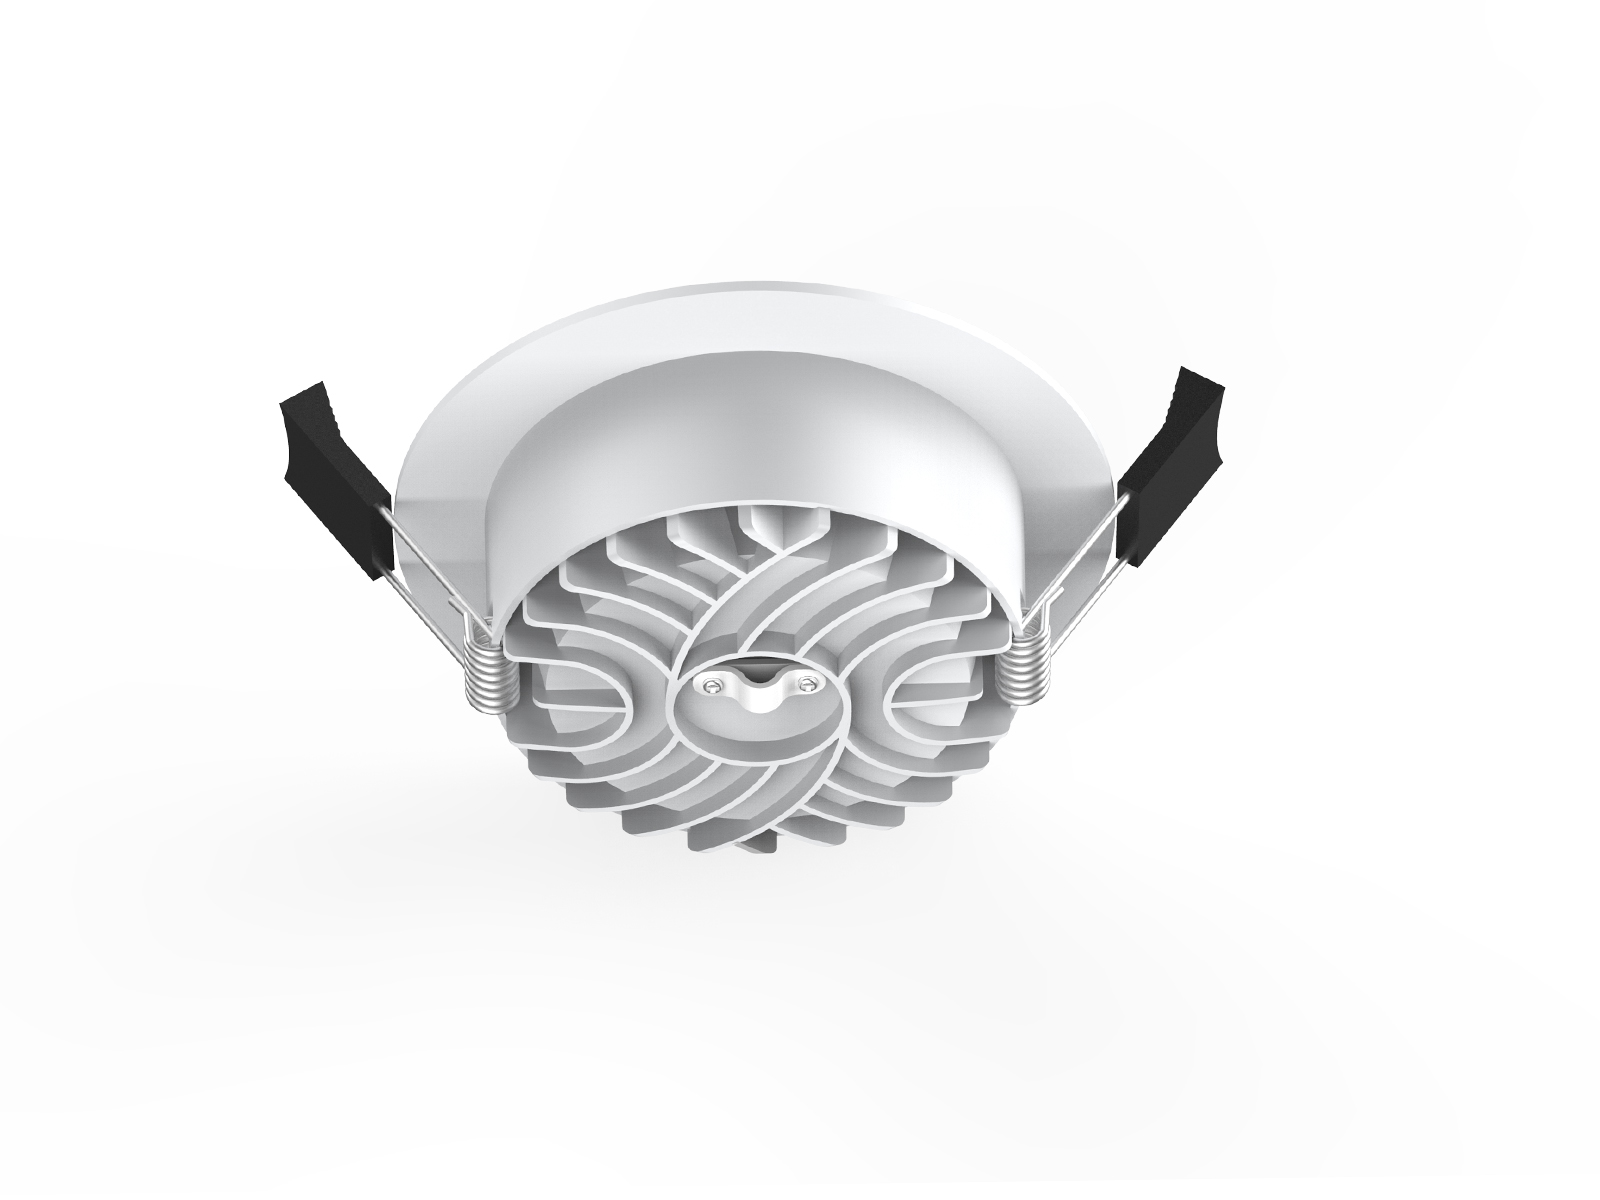 Dimmable Recessed downlight fixture